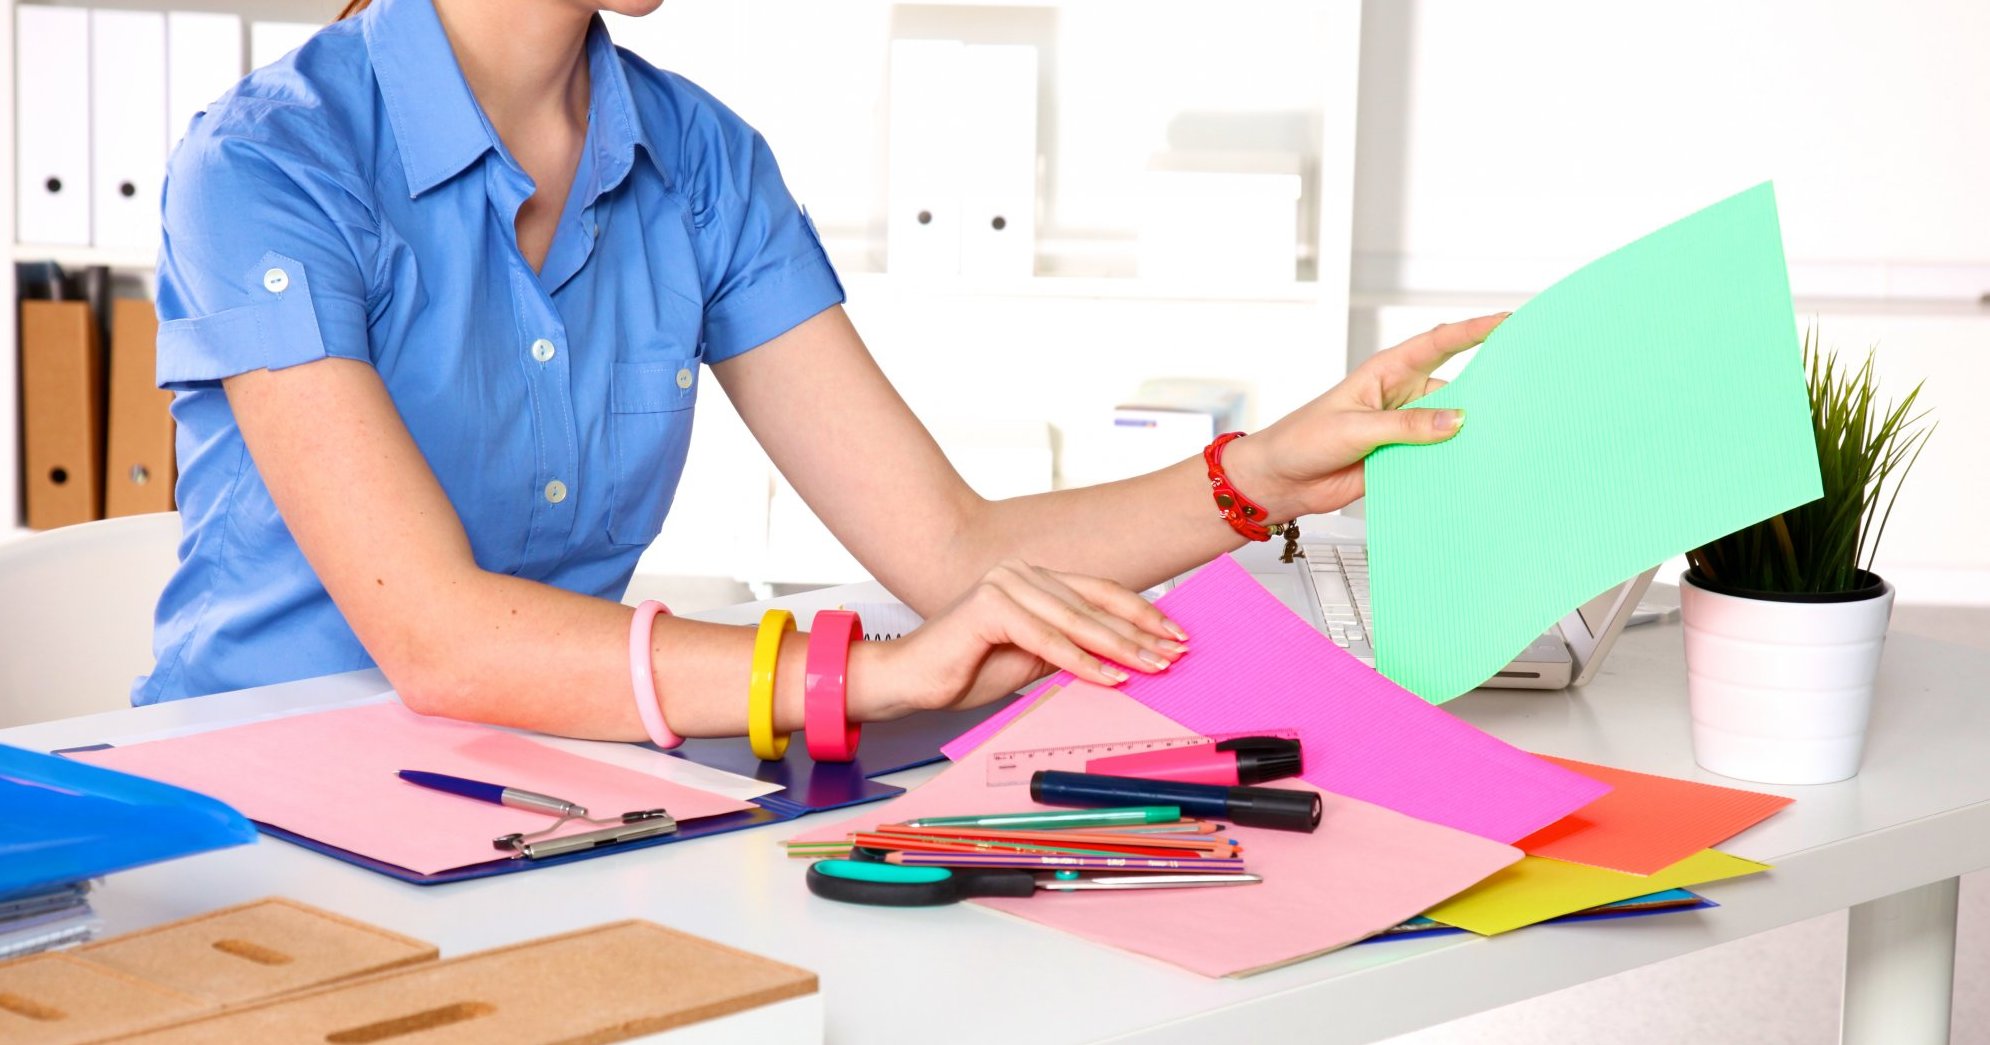 A woman wearing a short-sleeved blue button-down shirt sits at a desk, arranging sheets of paper in various colors. Other craft supplies like markers, rulers, and a scissors sit on the desk.